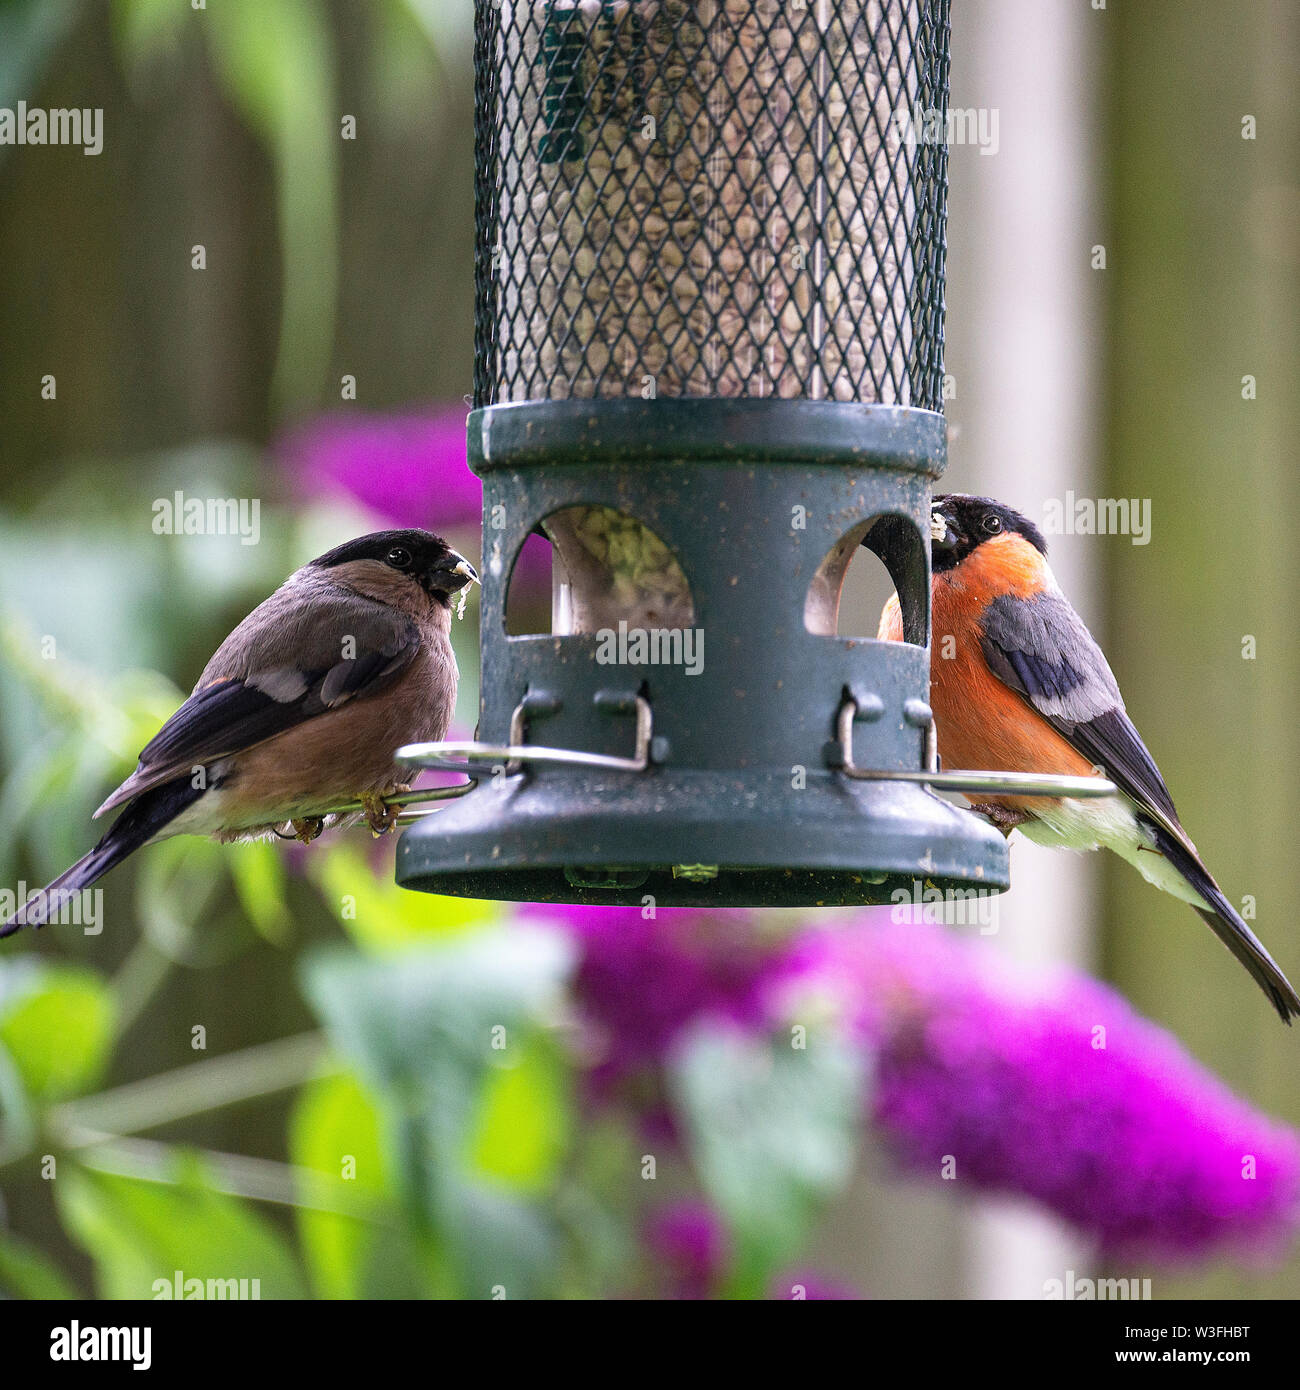 Male and Female Bullfinches Perching on a Bird Feeder Eating Sunflower Heart Seeds in a Garden in Alsager Cheshire England United Kingdom Stock Photo